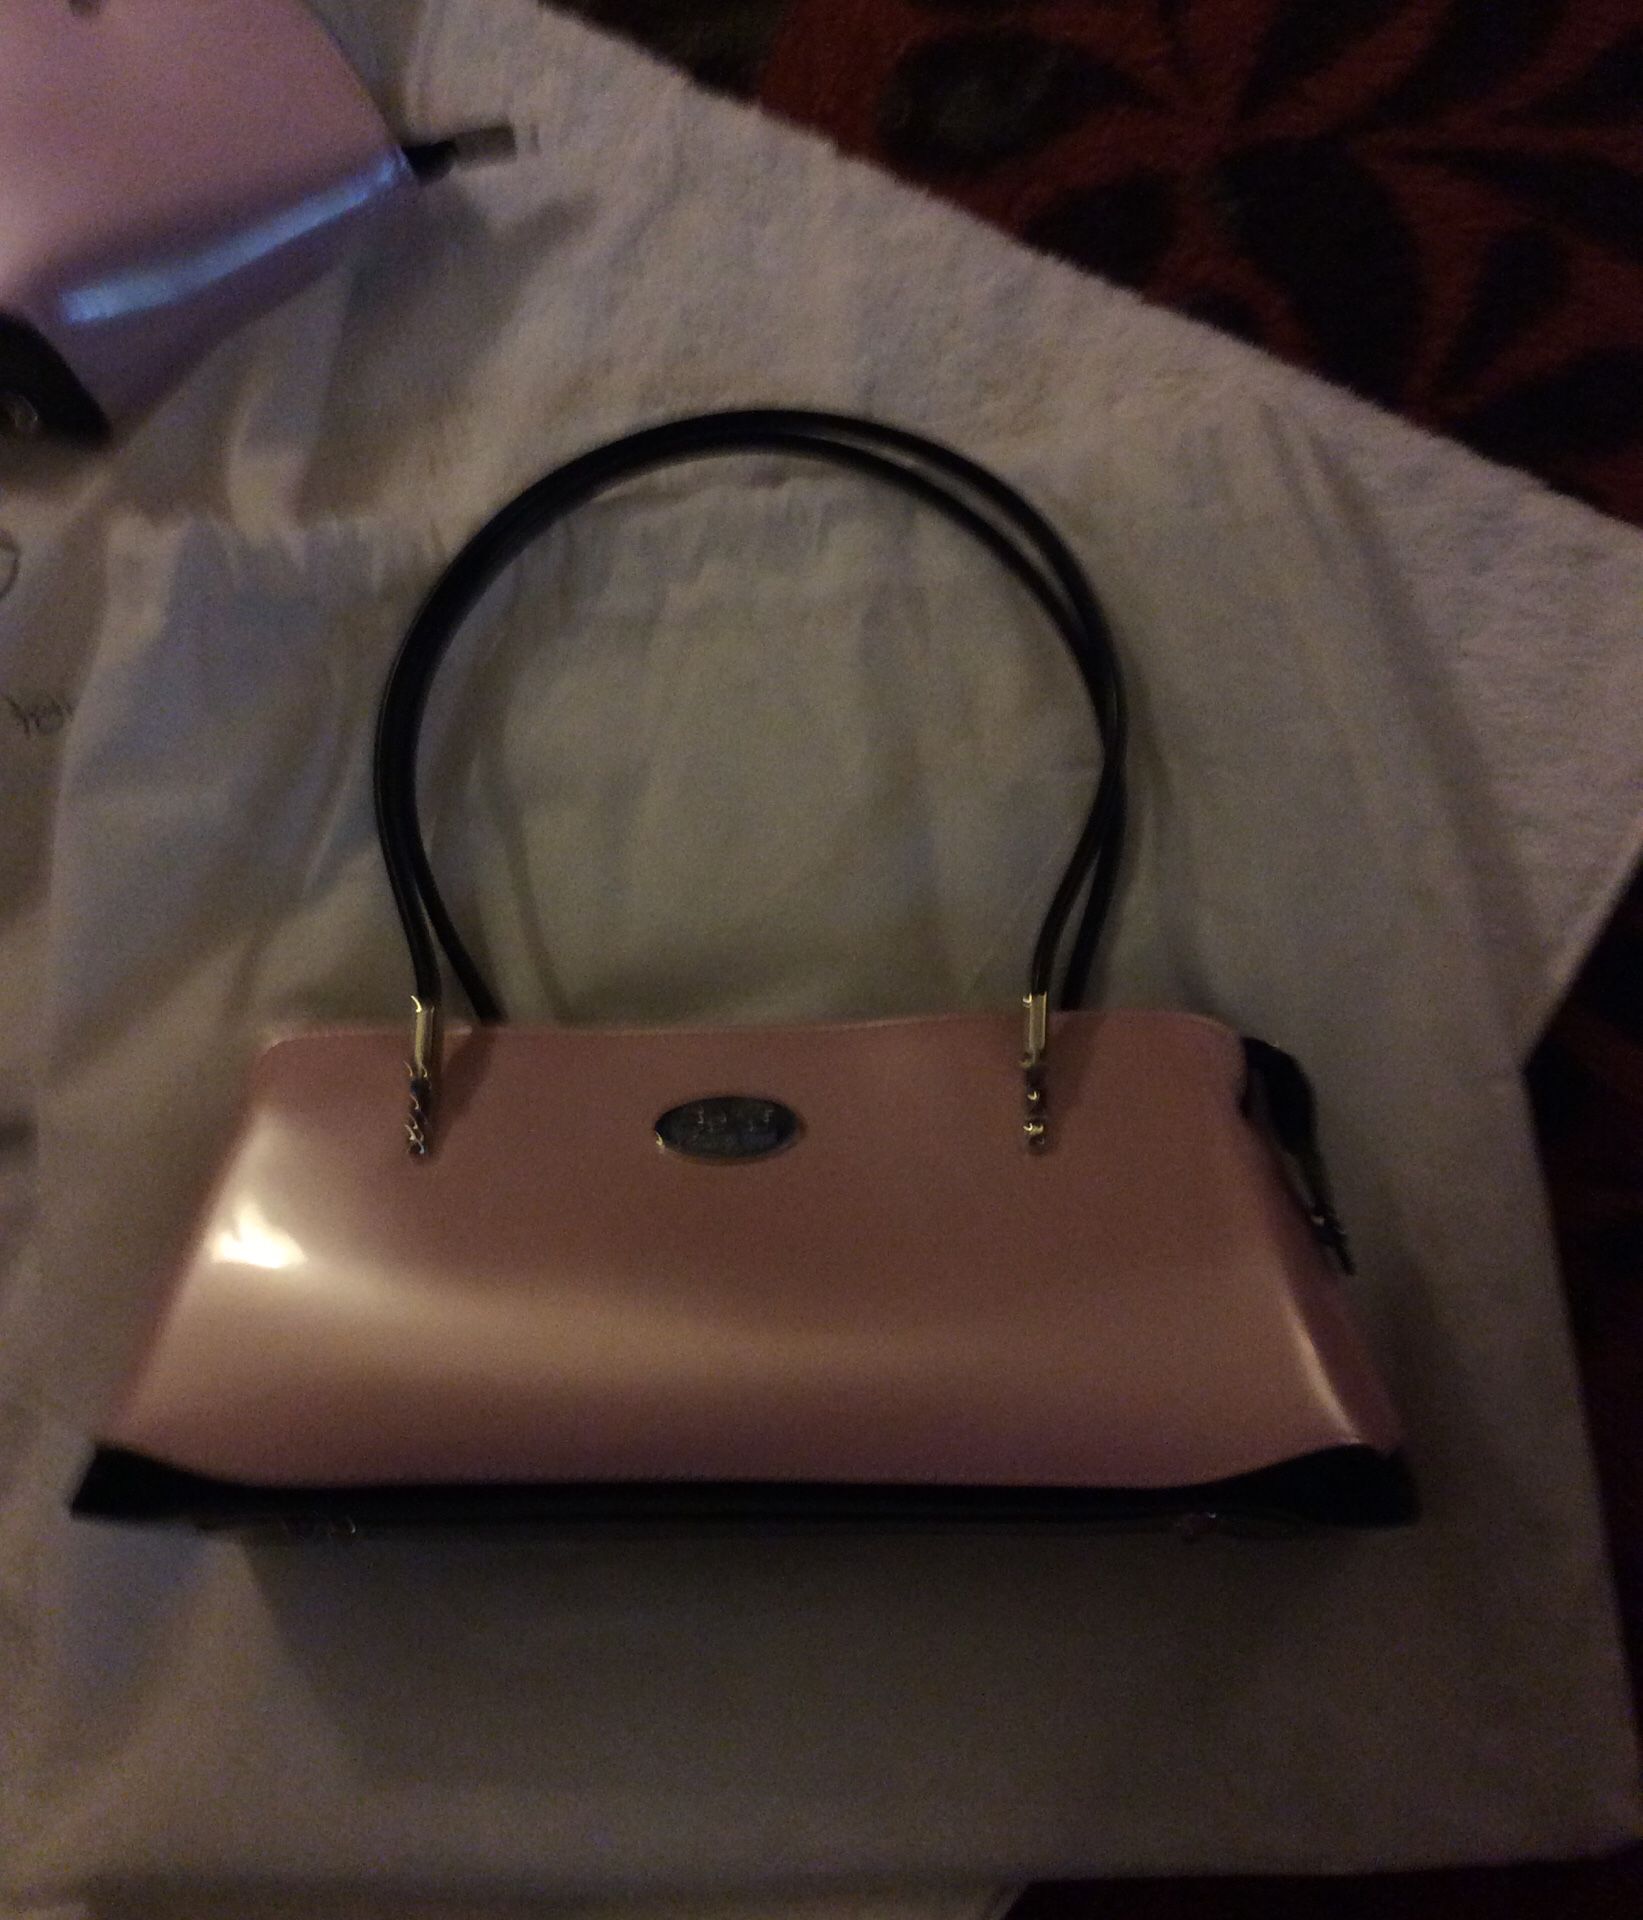 Beijo Breast Cancer Awareness Purse with original paperwork for warranty!  for Sale in Mint Hill, NC - OfferUp